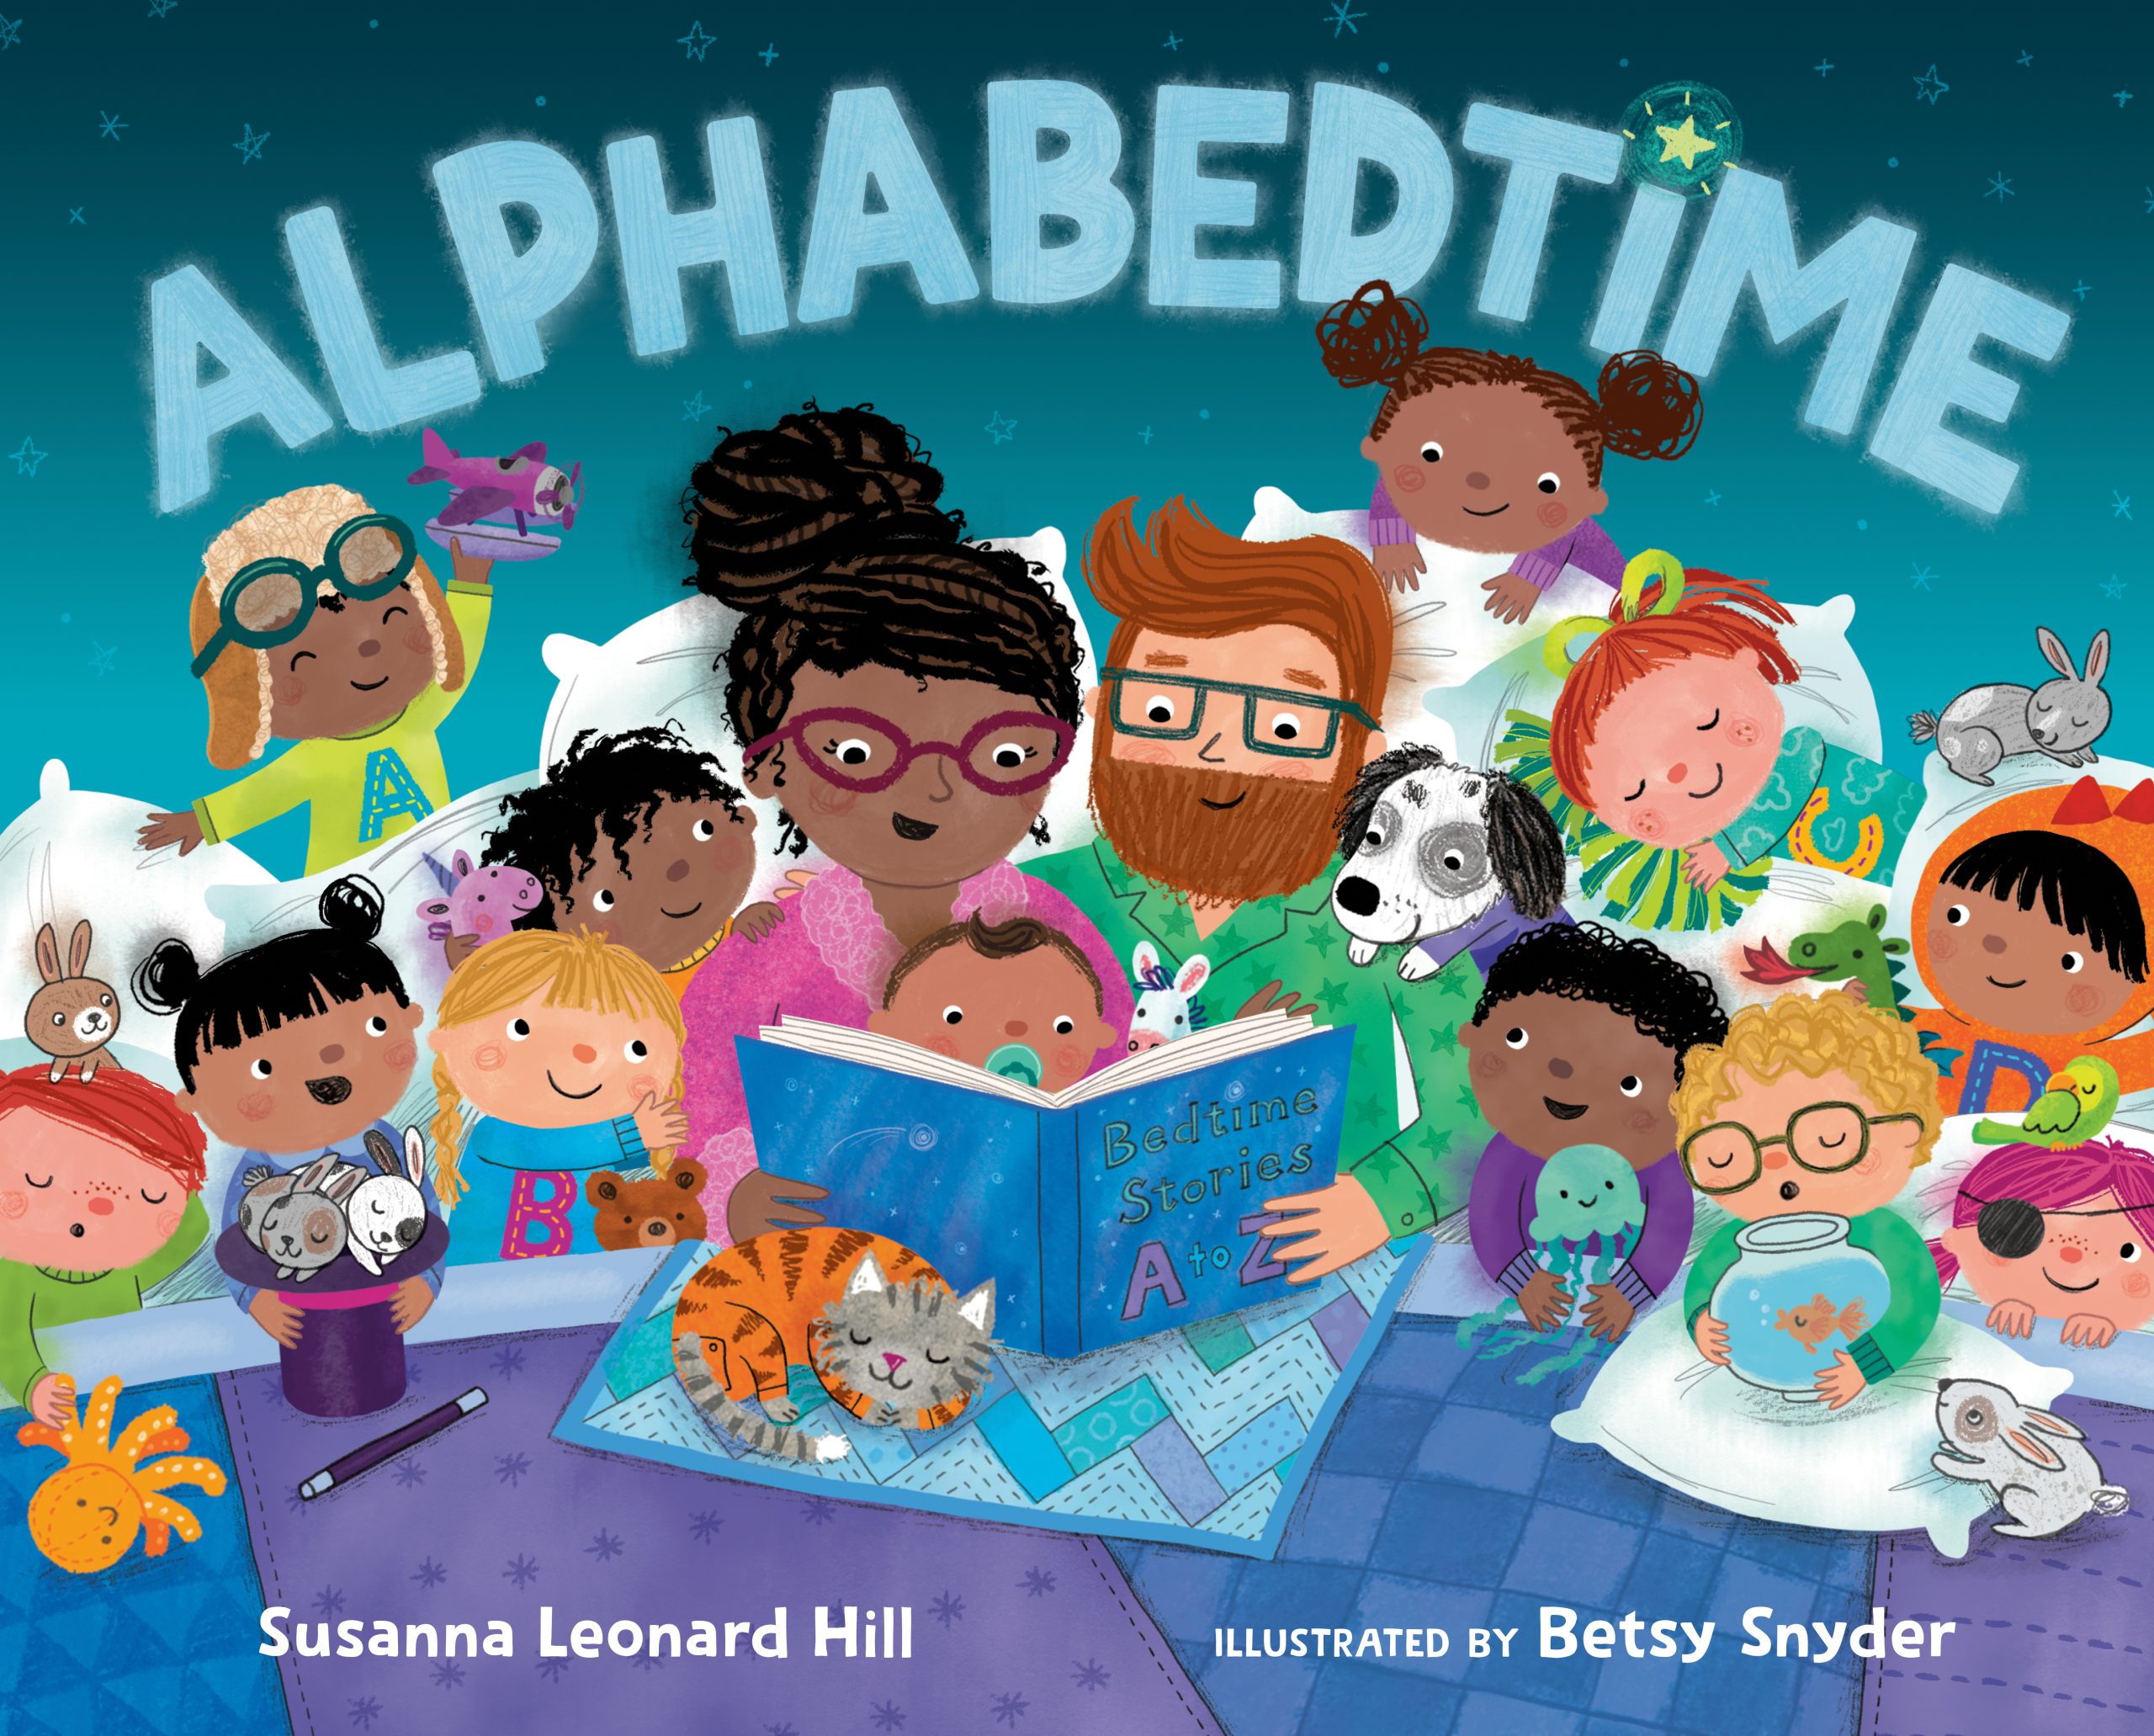 Chat With Author Susanna Leonard Hill and Illustrator Betsy Snyder (ALPHABEDTIME), Plus Giveaway! ~ US Only!